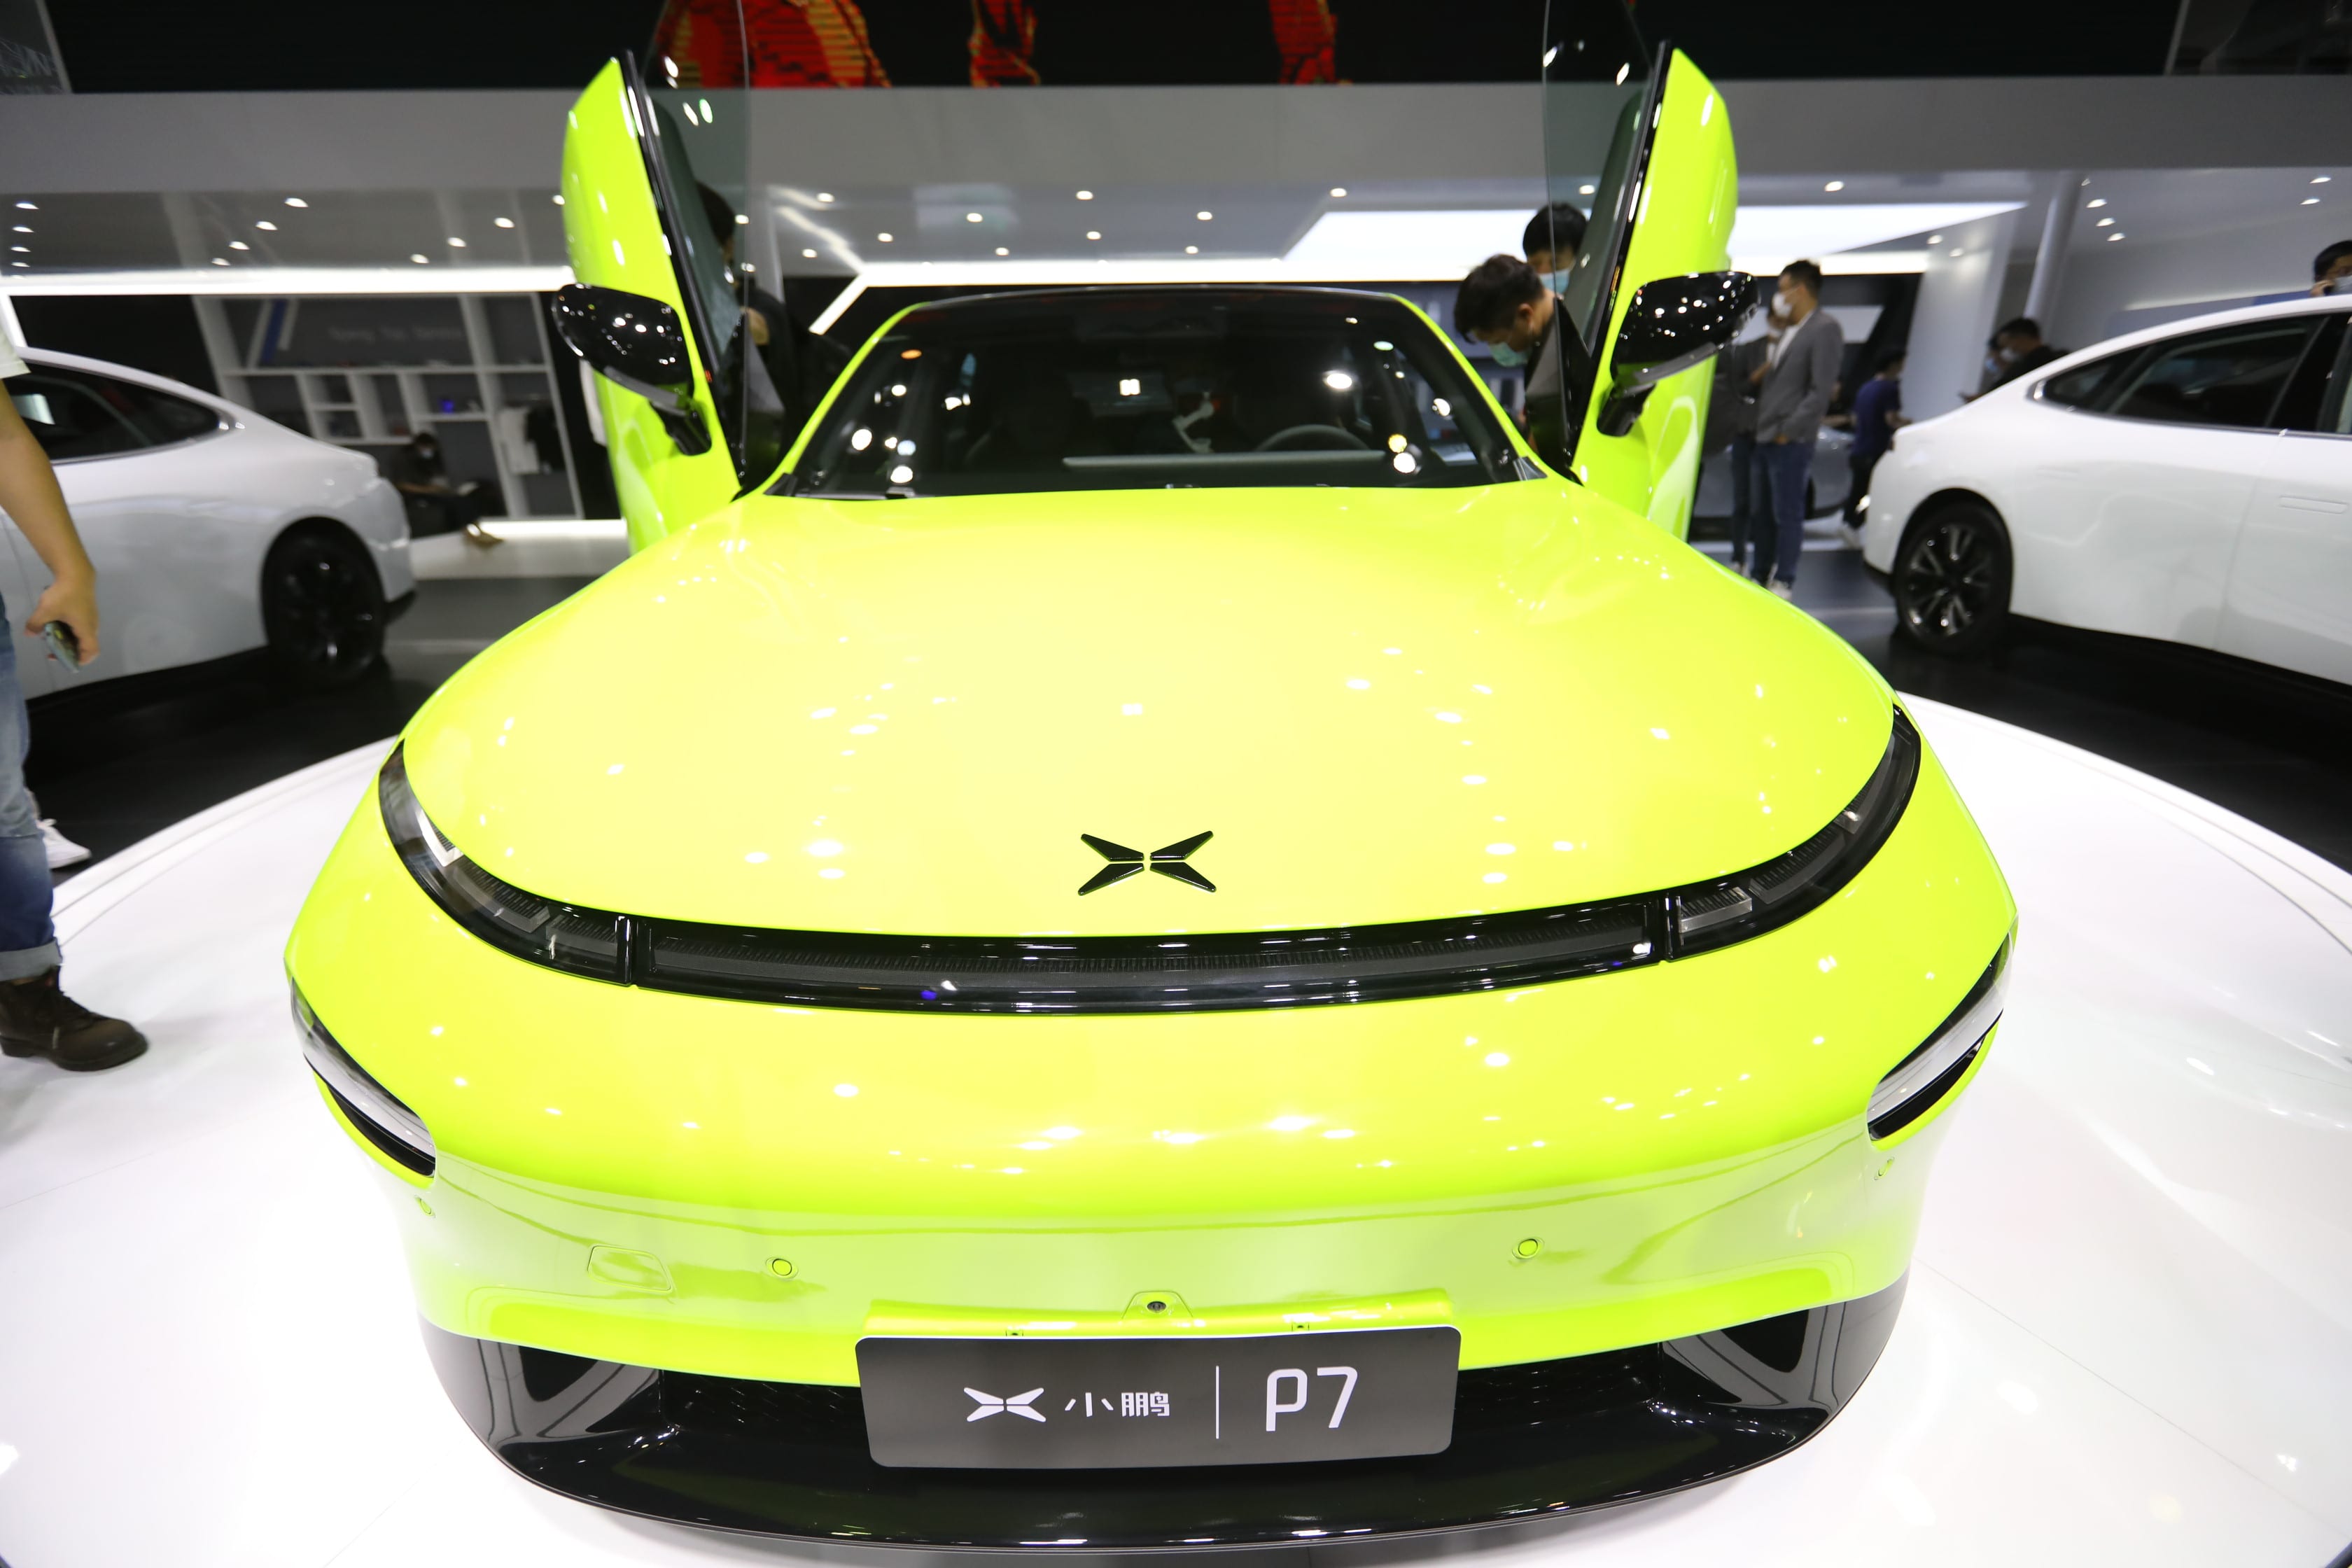 Chinese EV makers Xpeng, Nio January deliveries rise from a year ago